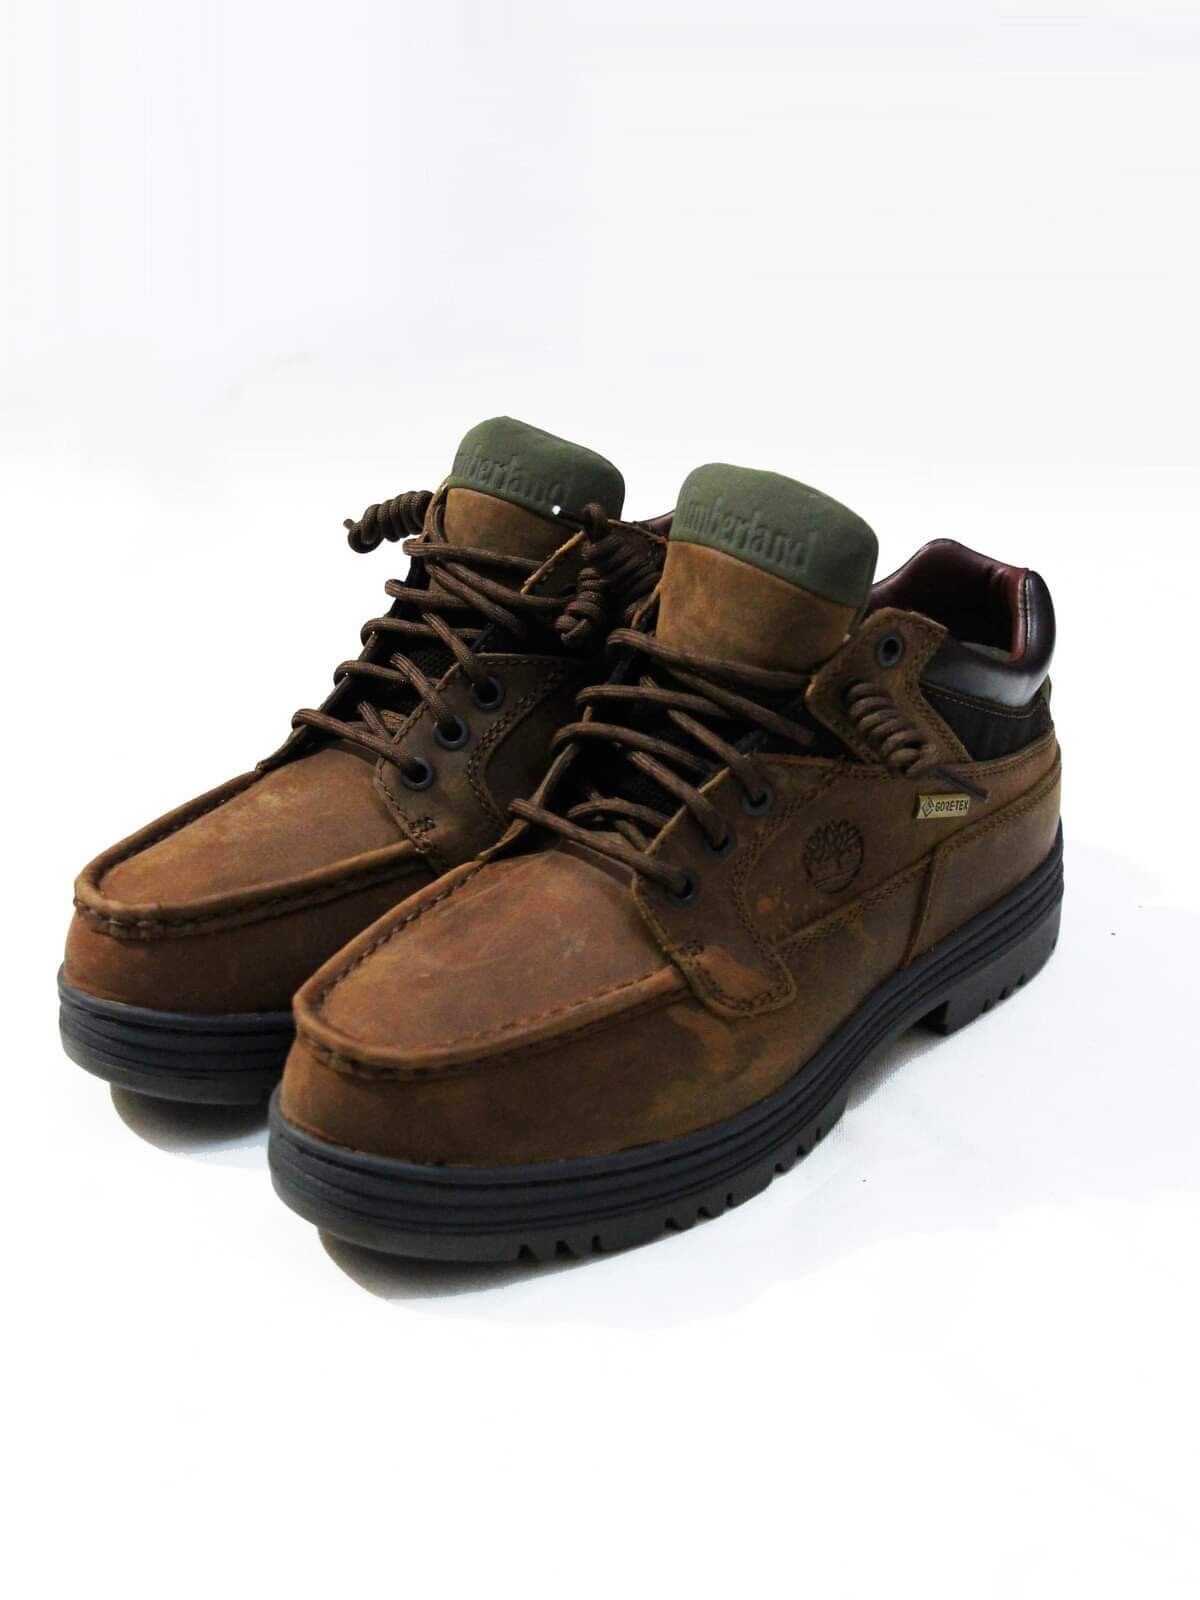 Timberland Gore-Tex Heritage Moc Toe Boots